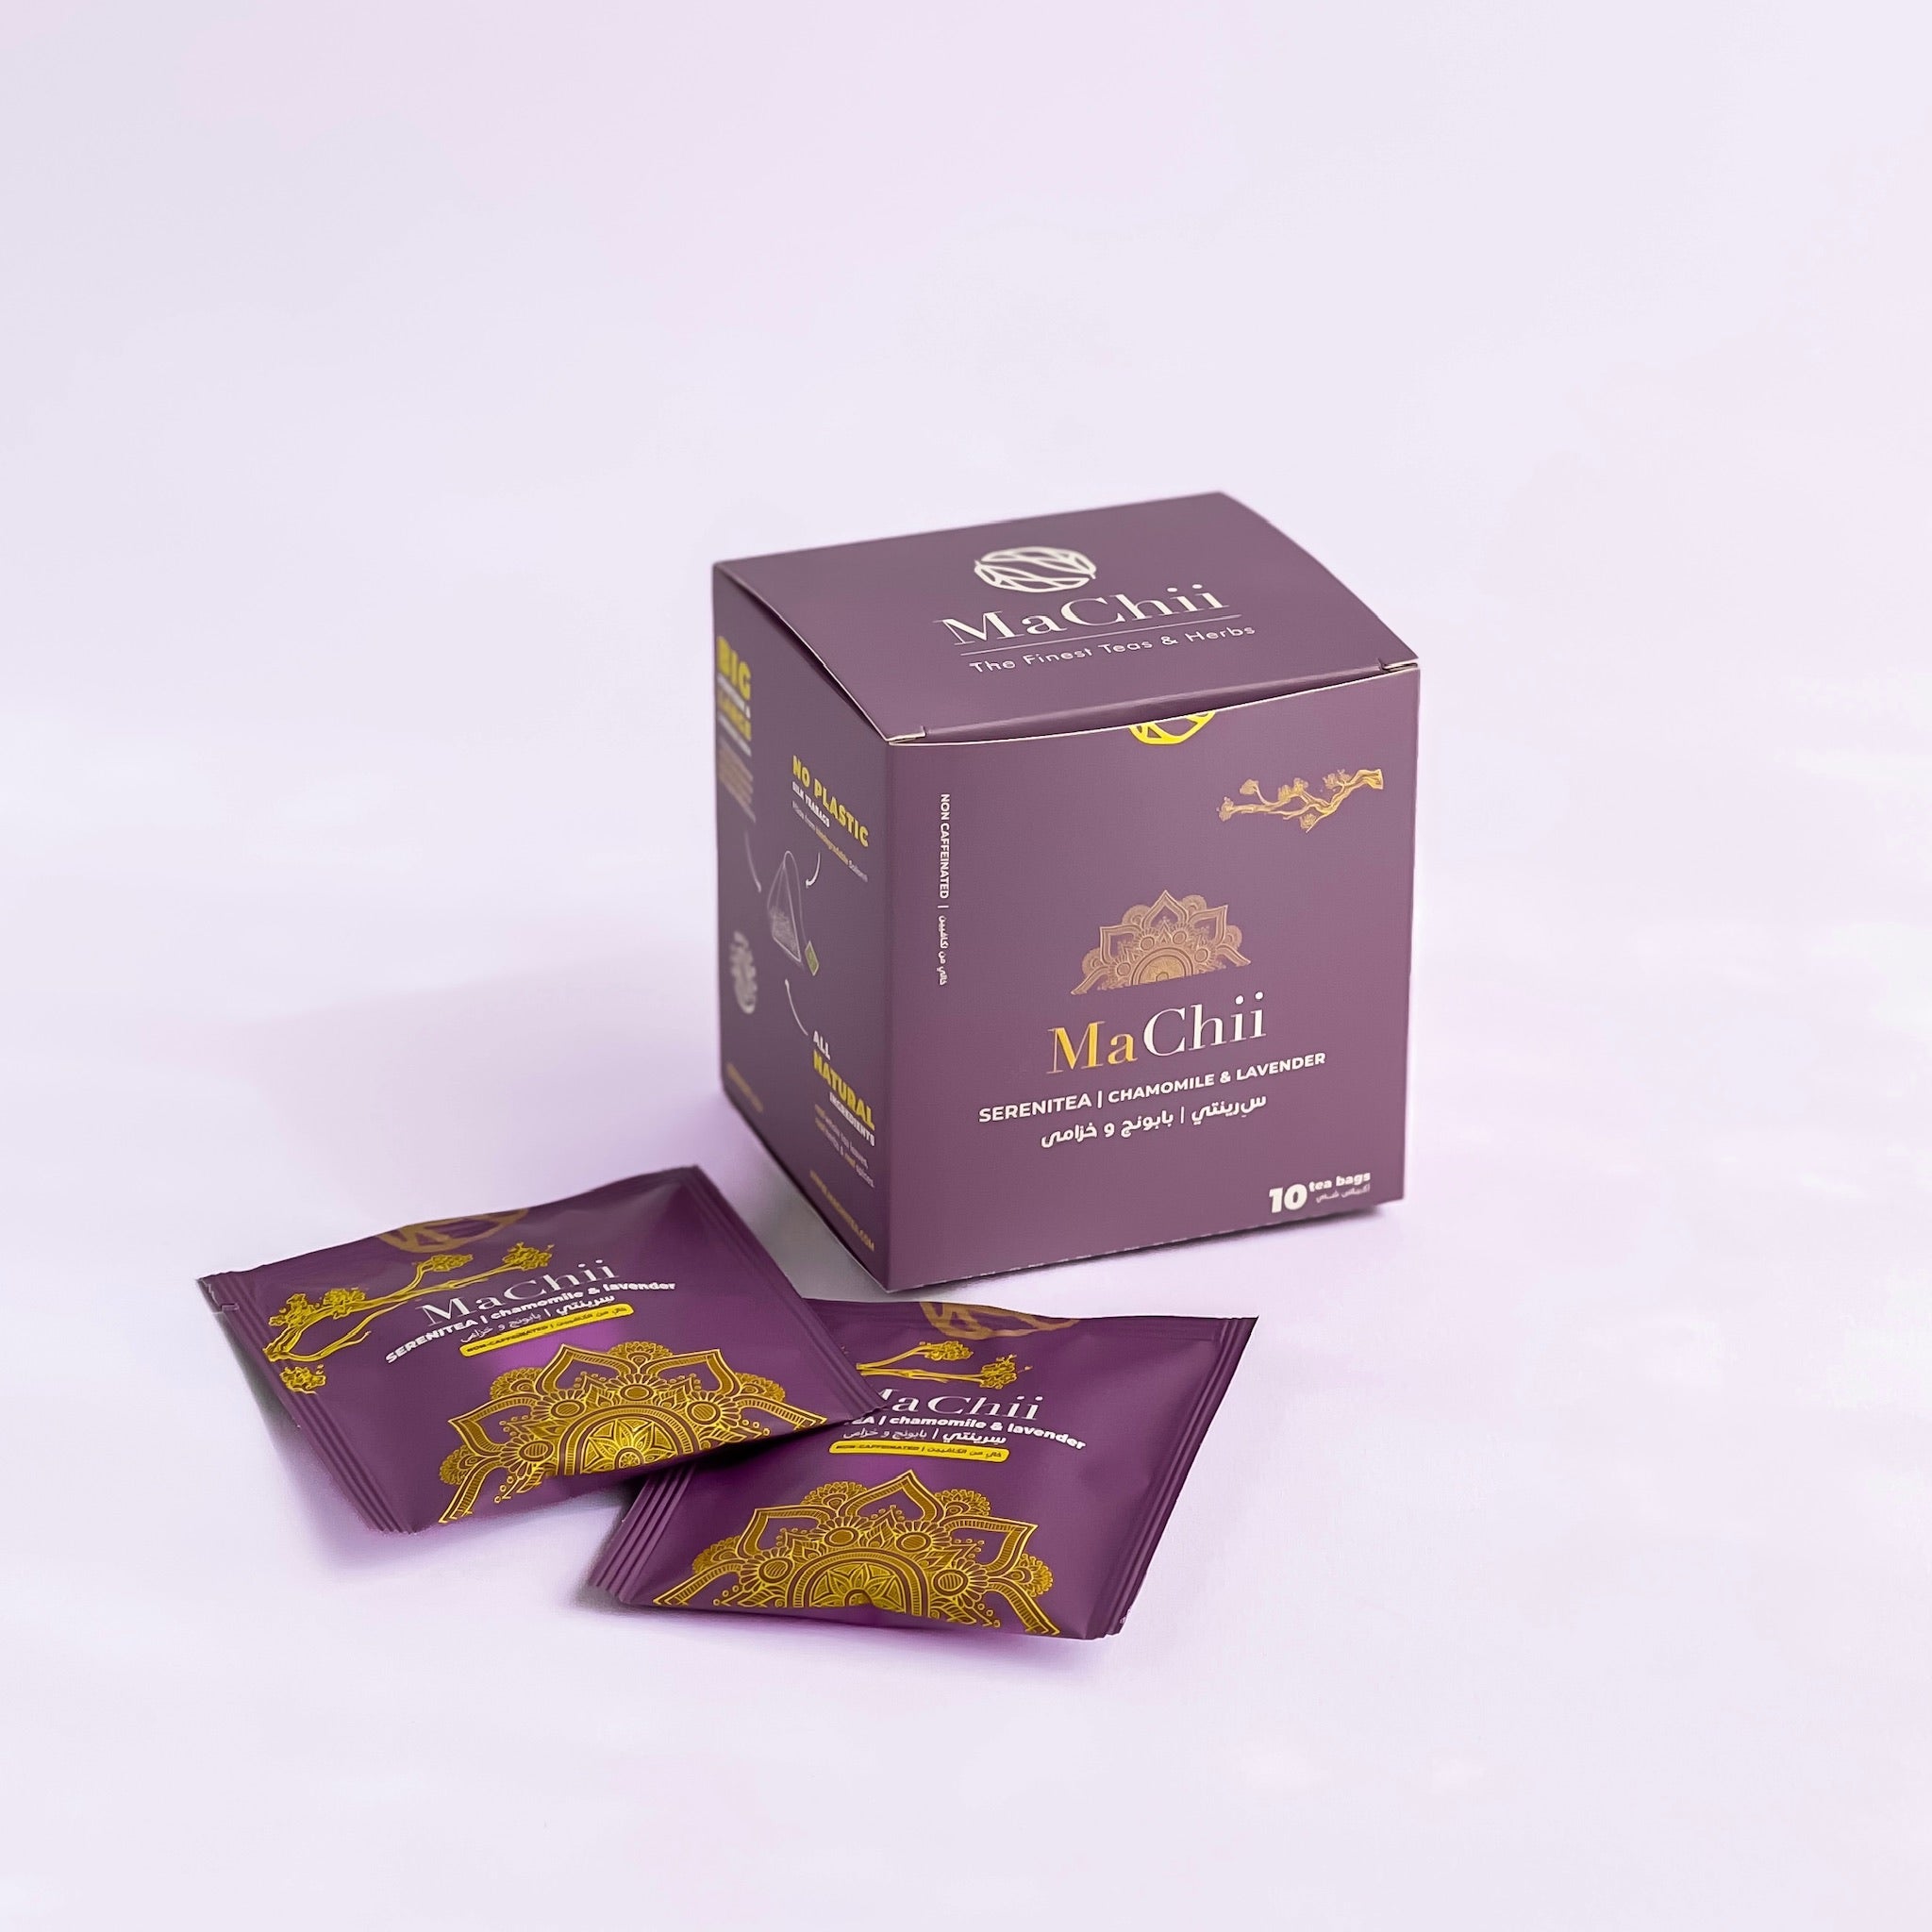 organic serenitea evenlopes from MaChii Tea next to their packaging box. Photo is shot on a purple background. The tea box has a mandala on it.